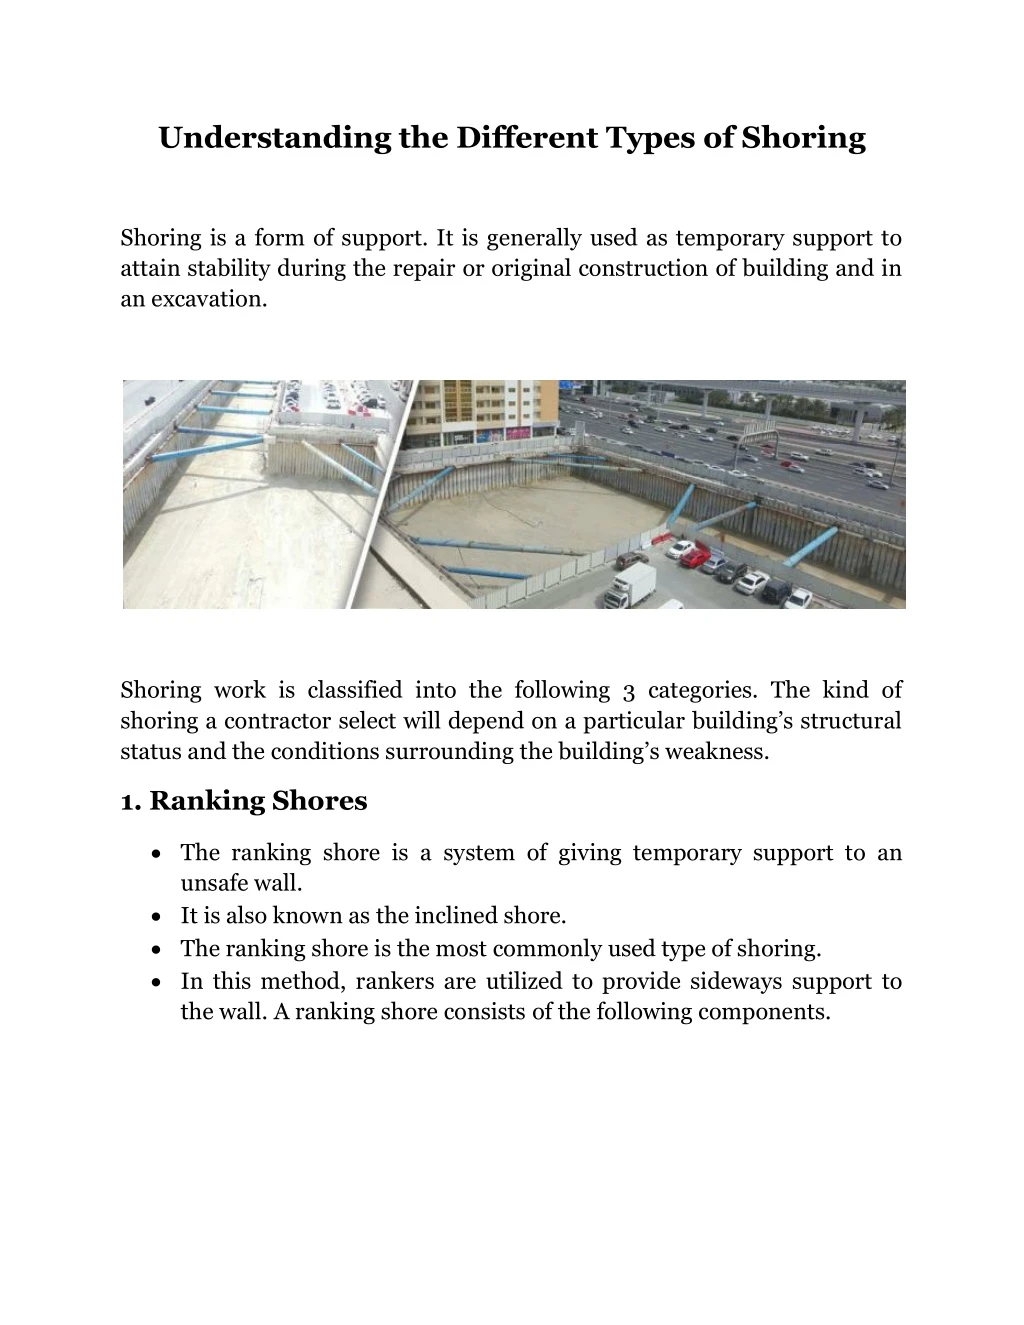 understanding the different types of shoring